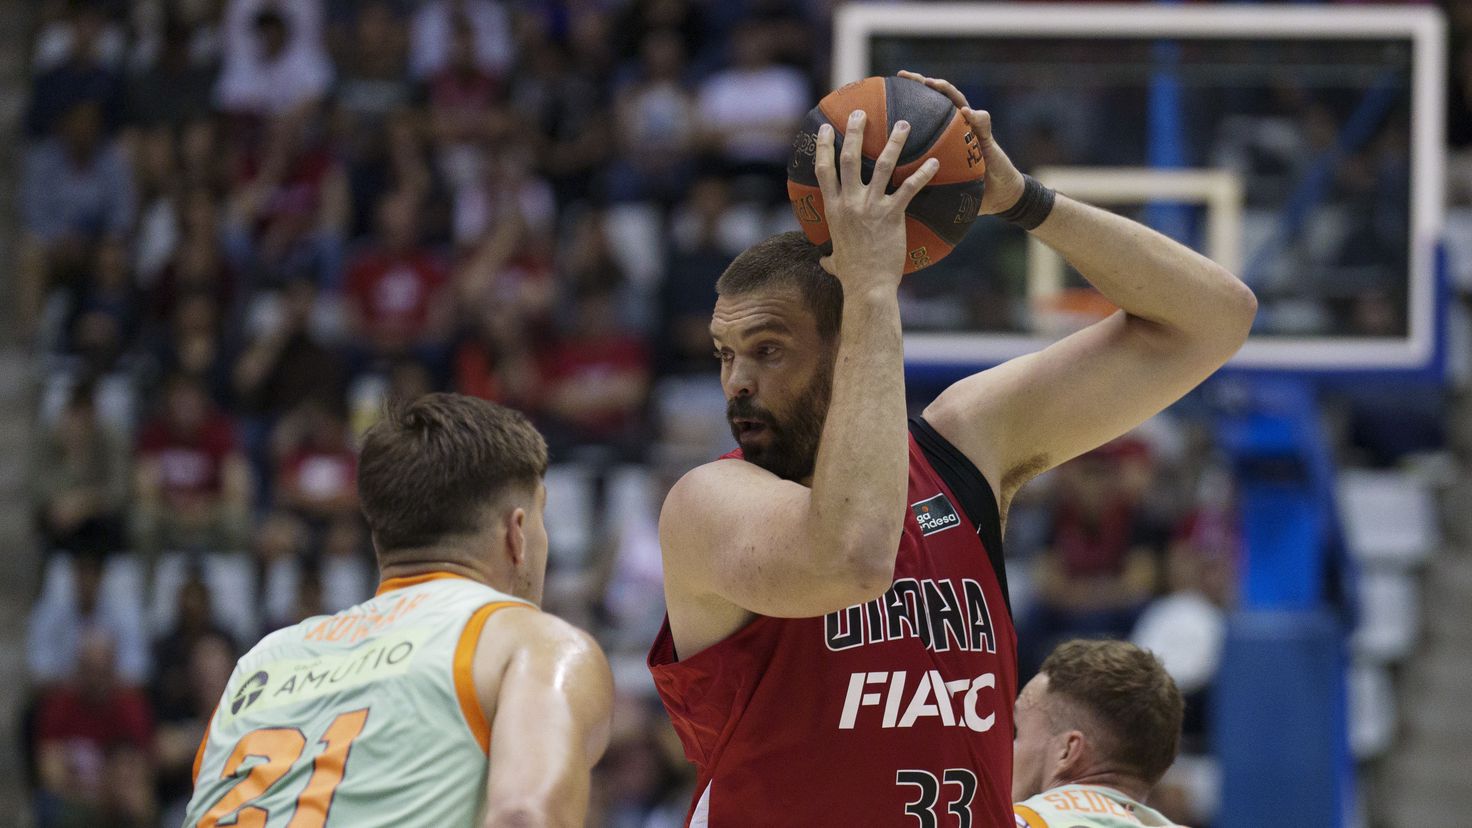 Baskonia wins in Girona and will cross paths with Penya
